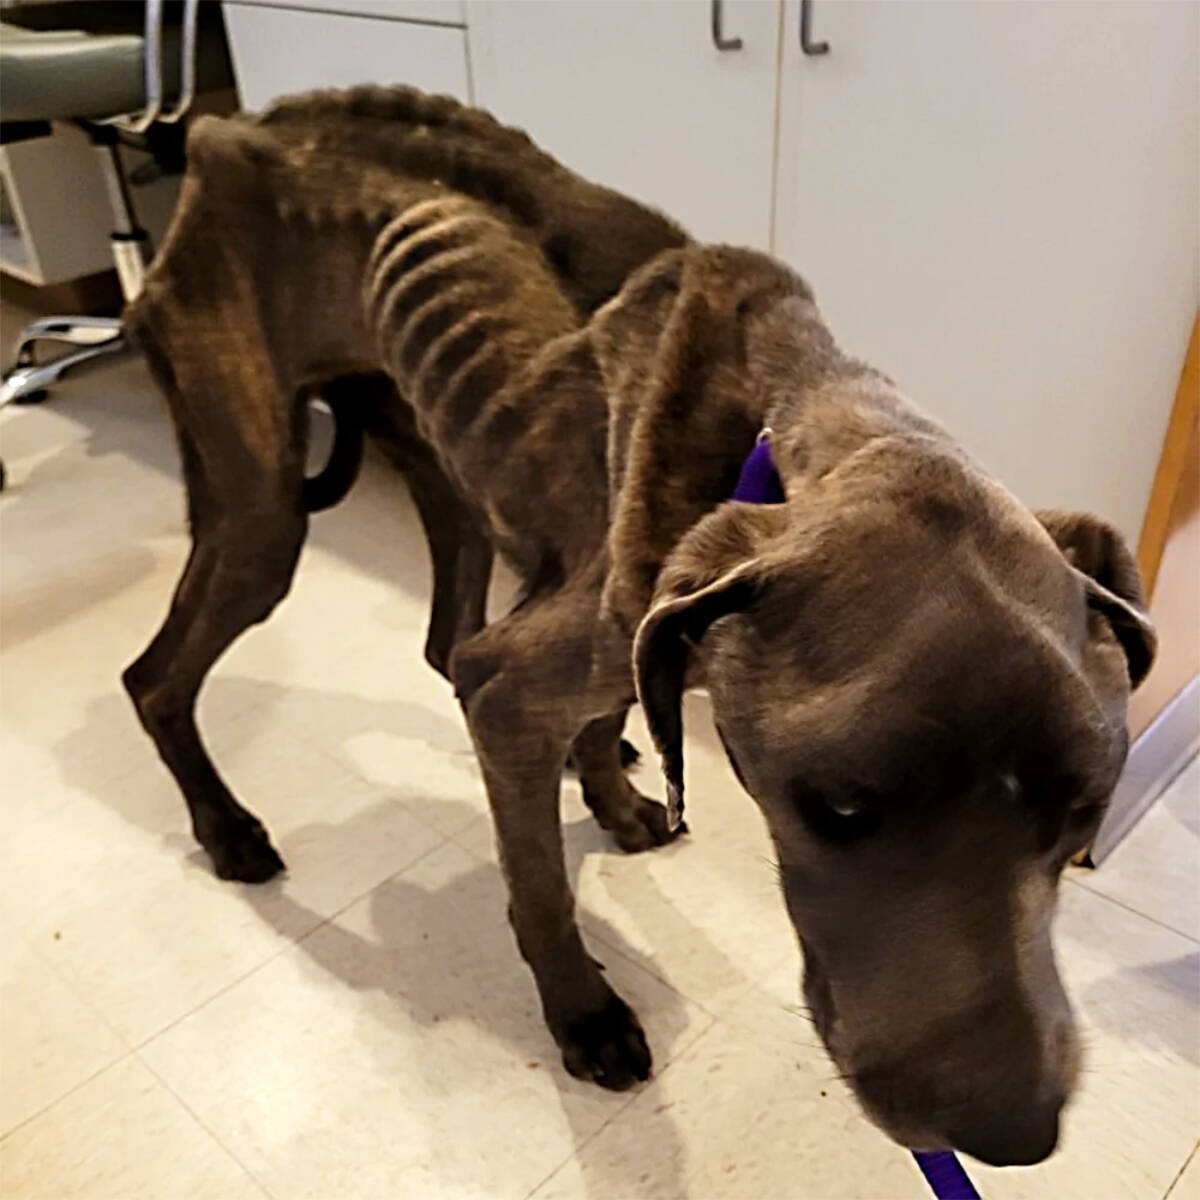 The BC SPCA seized 15 starving dogs from a Cane Corso breeder in Clearwater Jan. 11. (BC SPCA photo)